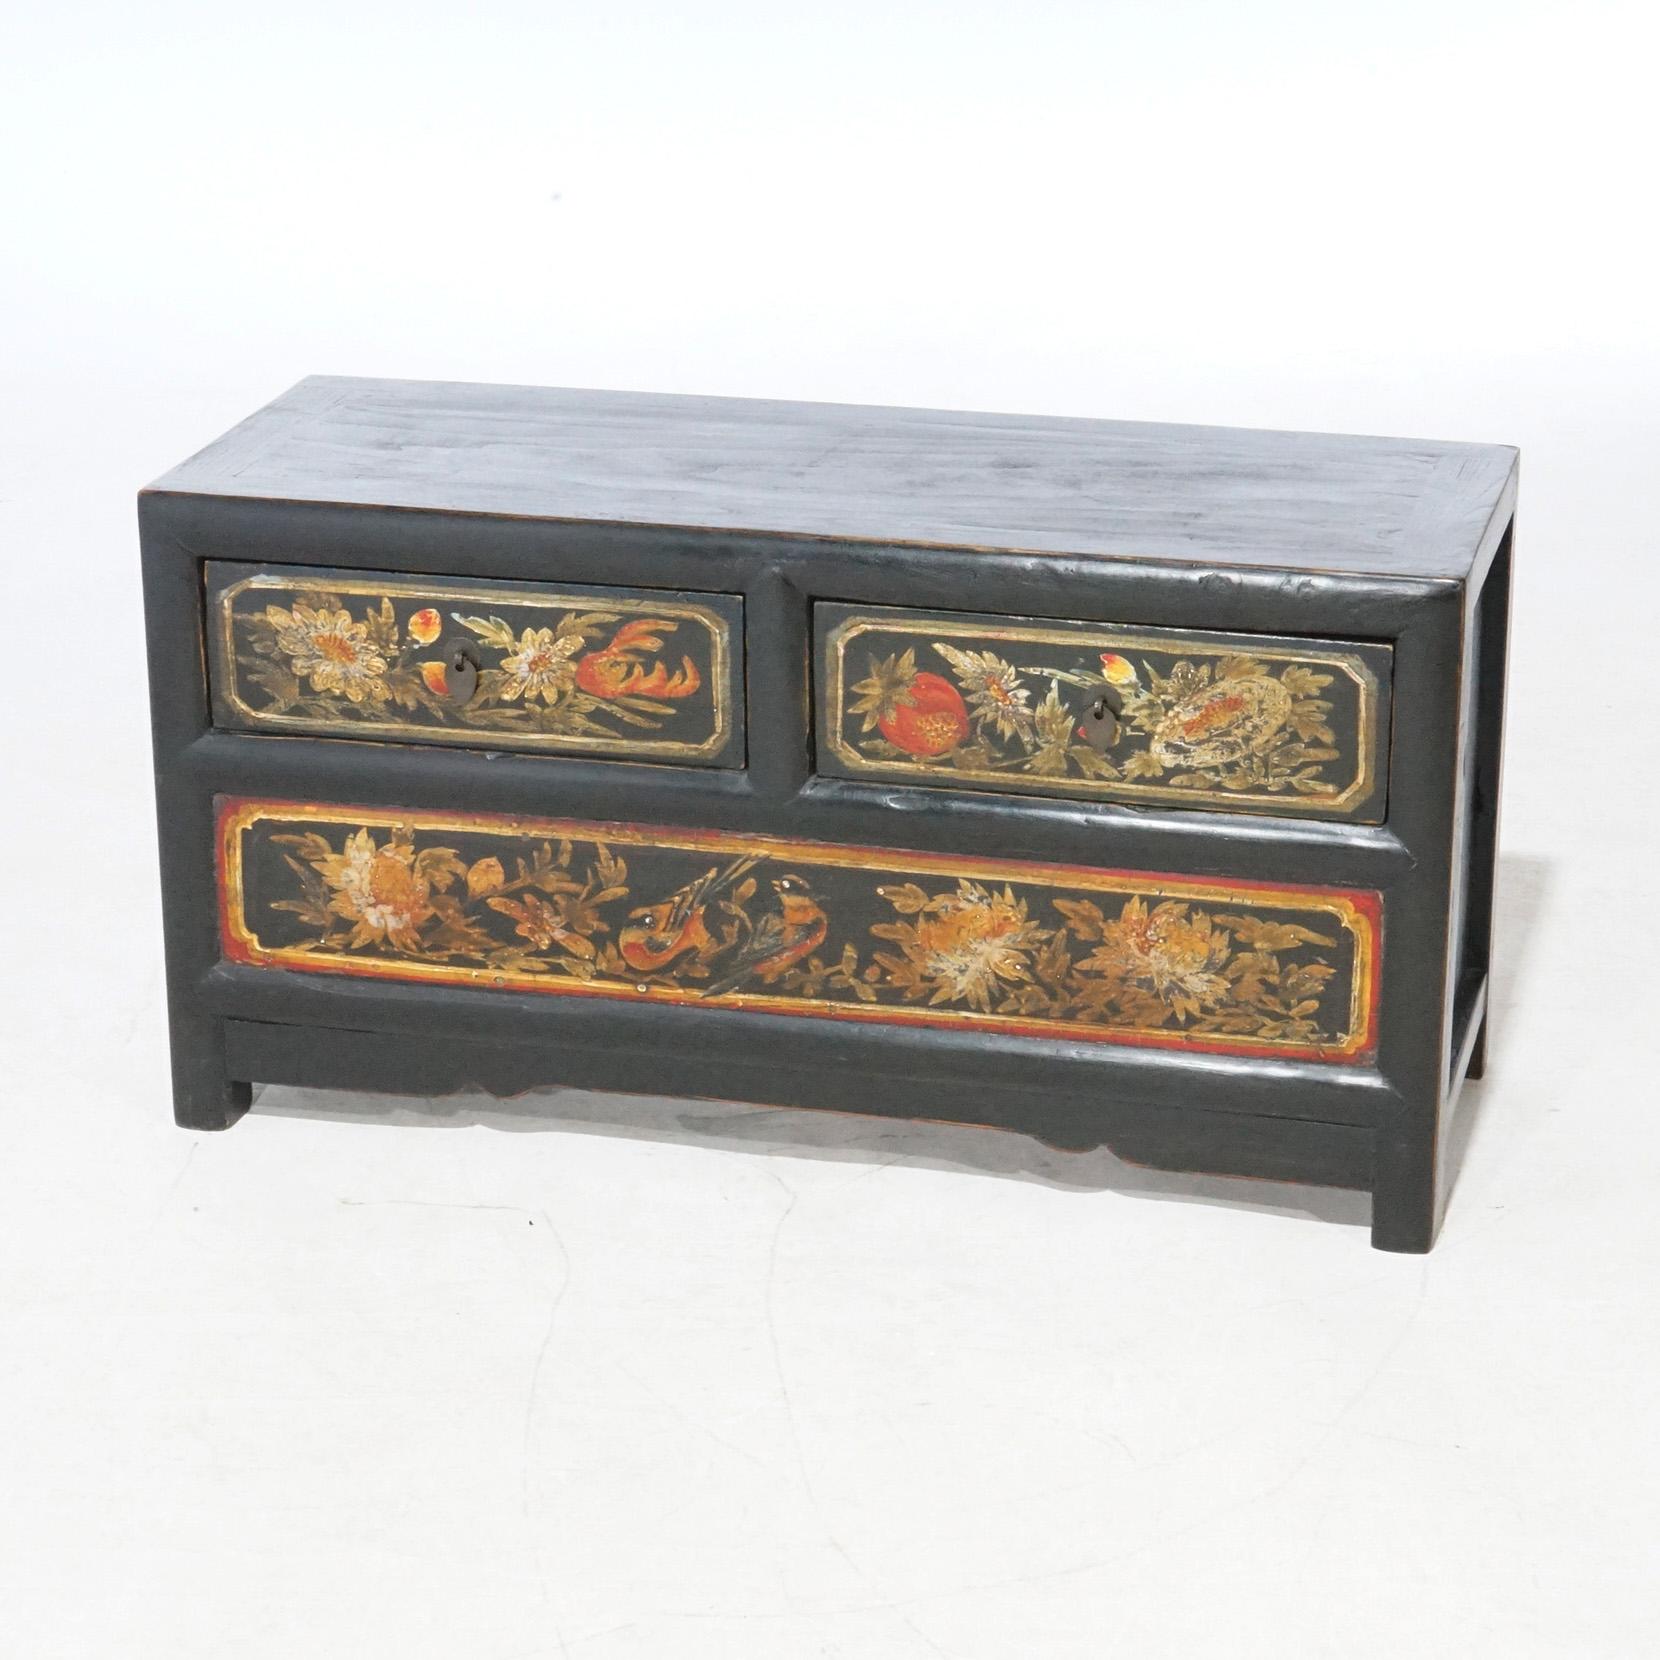 A Chinese polychrome low chest offers two smaller upper drawers and a single lower long drawer, each with hand-painted garden elements including birds, foliate, floral and fruit elements, 20th century

Measures - 16.5